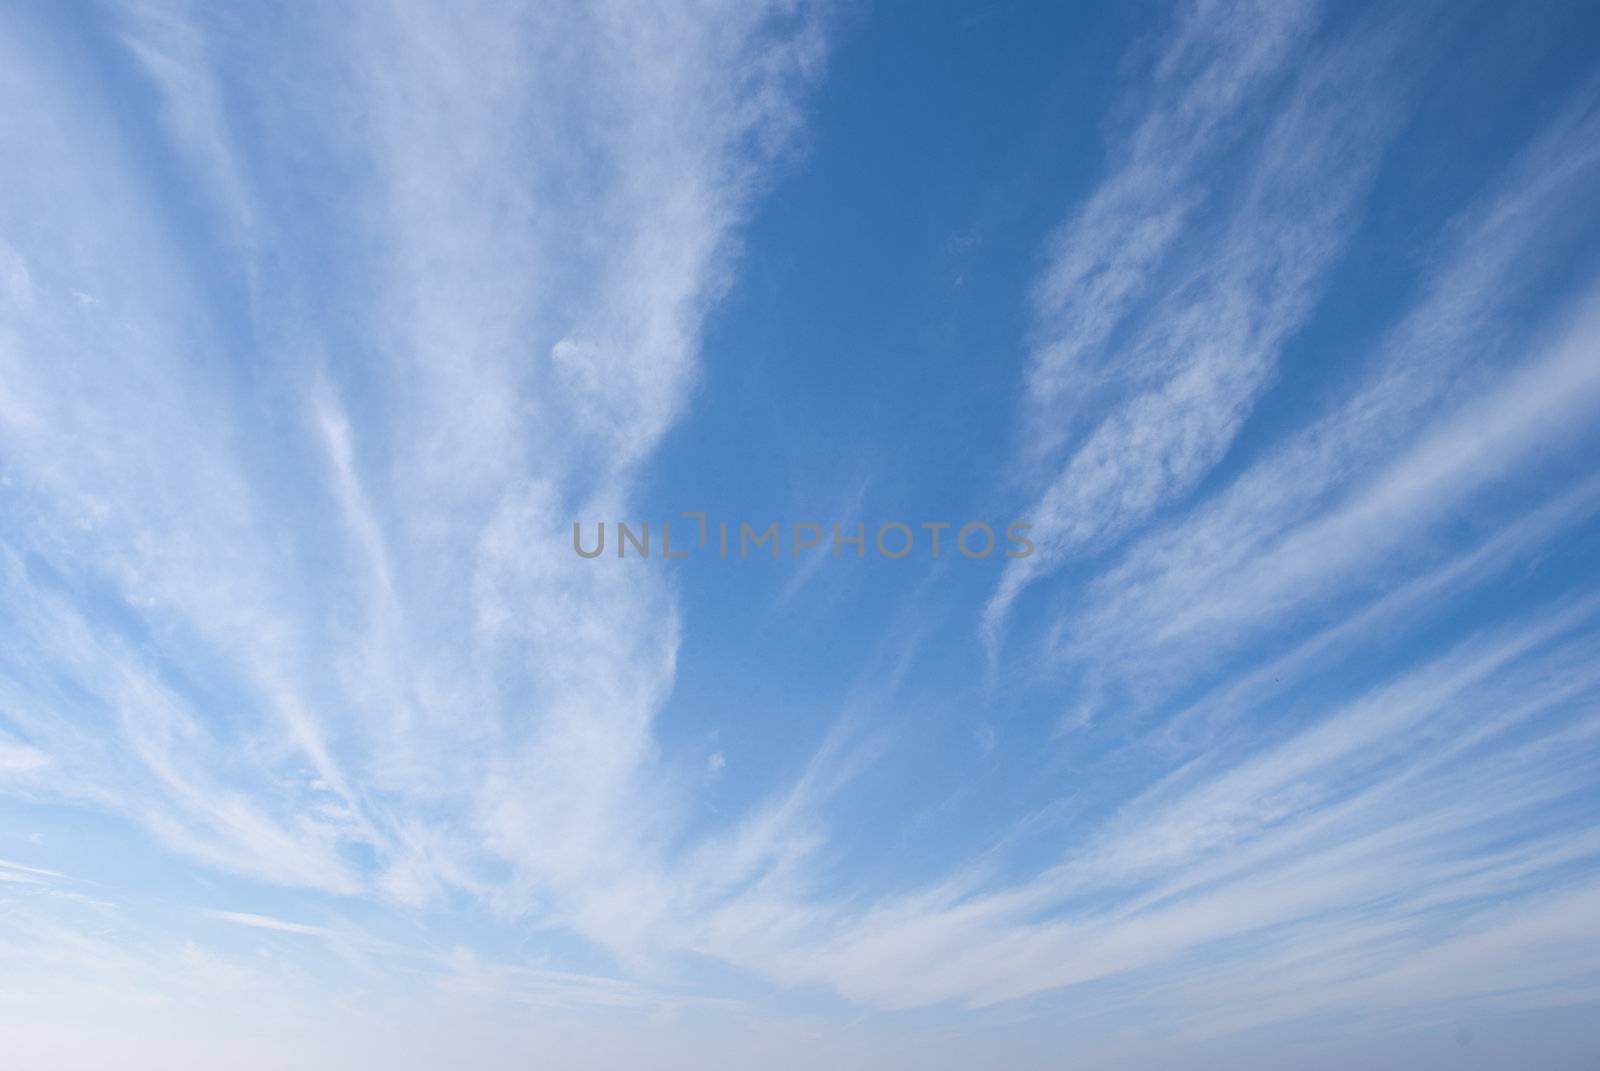 Cirrus or Mares Tails Clouds against a blue sky